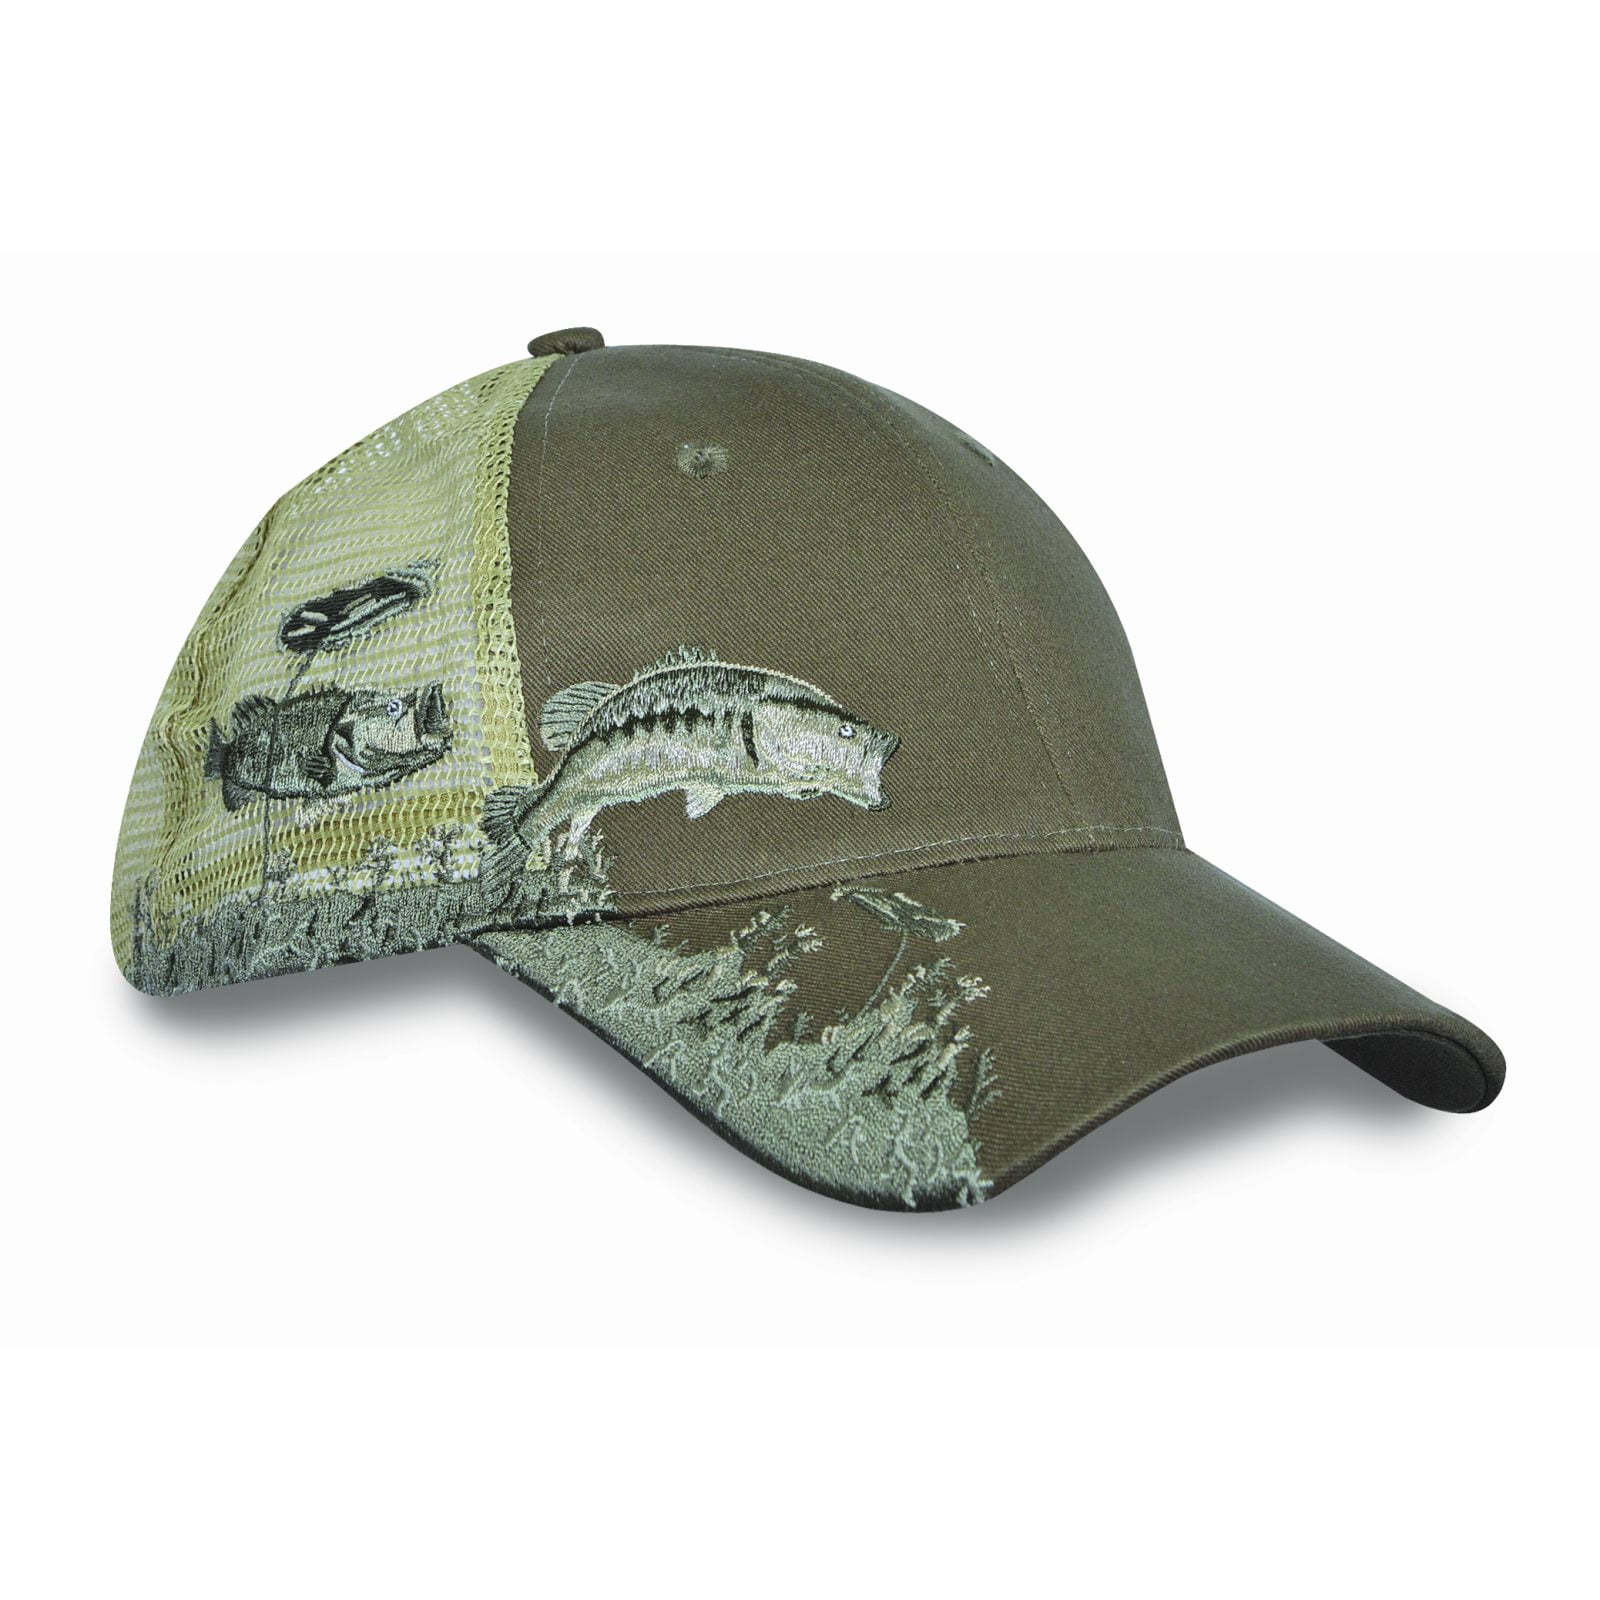 Men's Bass Mesh Hunting Fishing Hat Fish Embroidery, Olive by KC